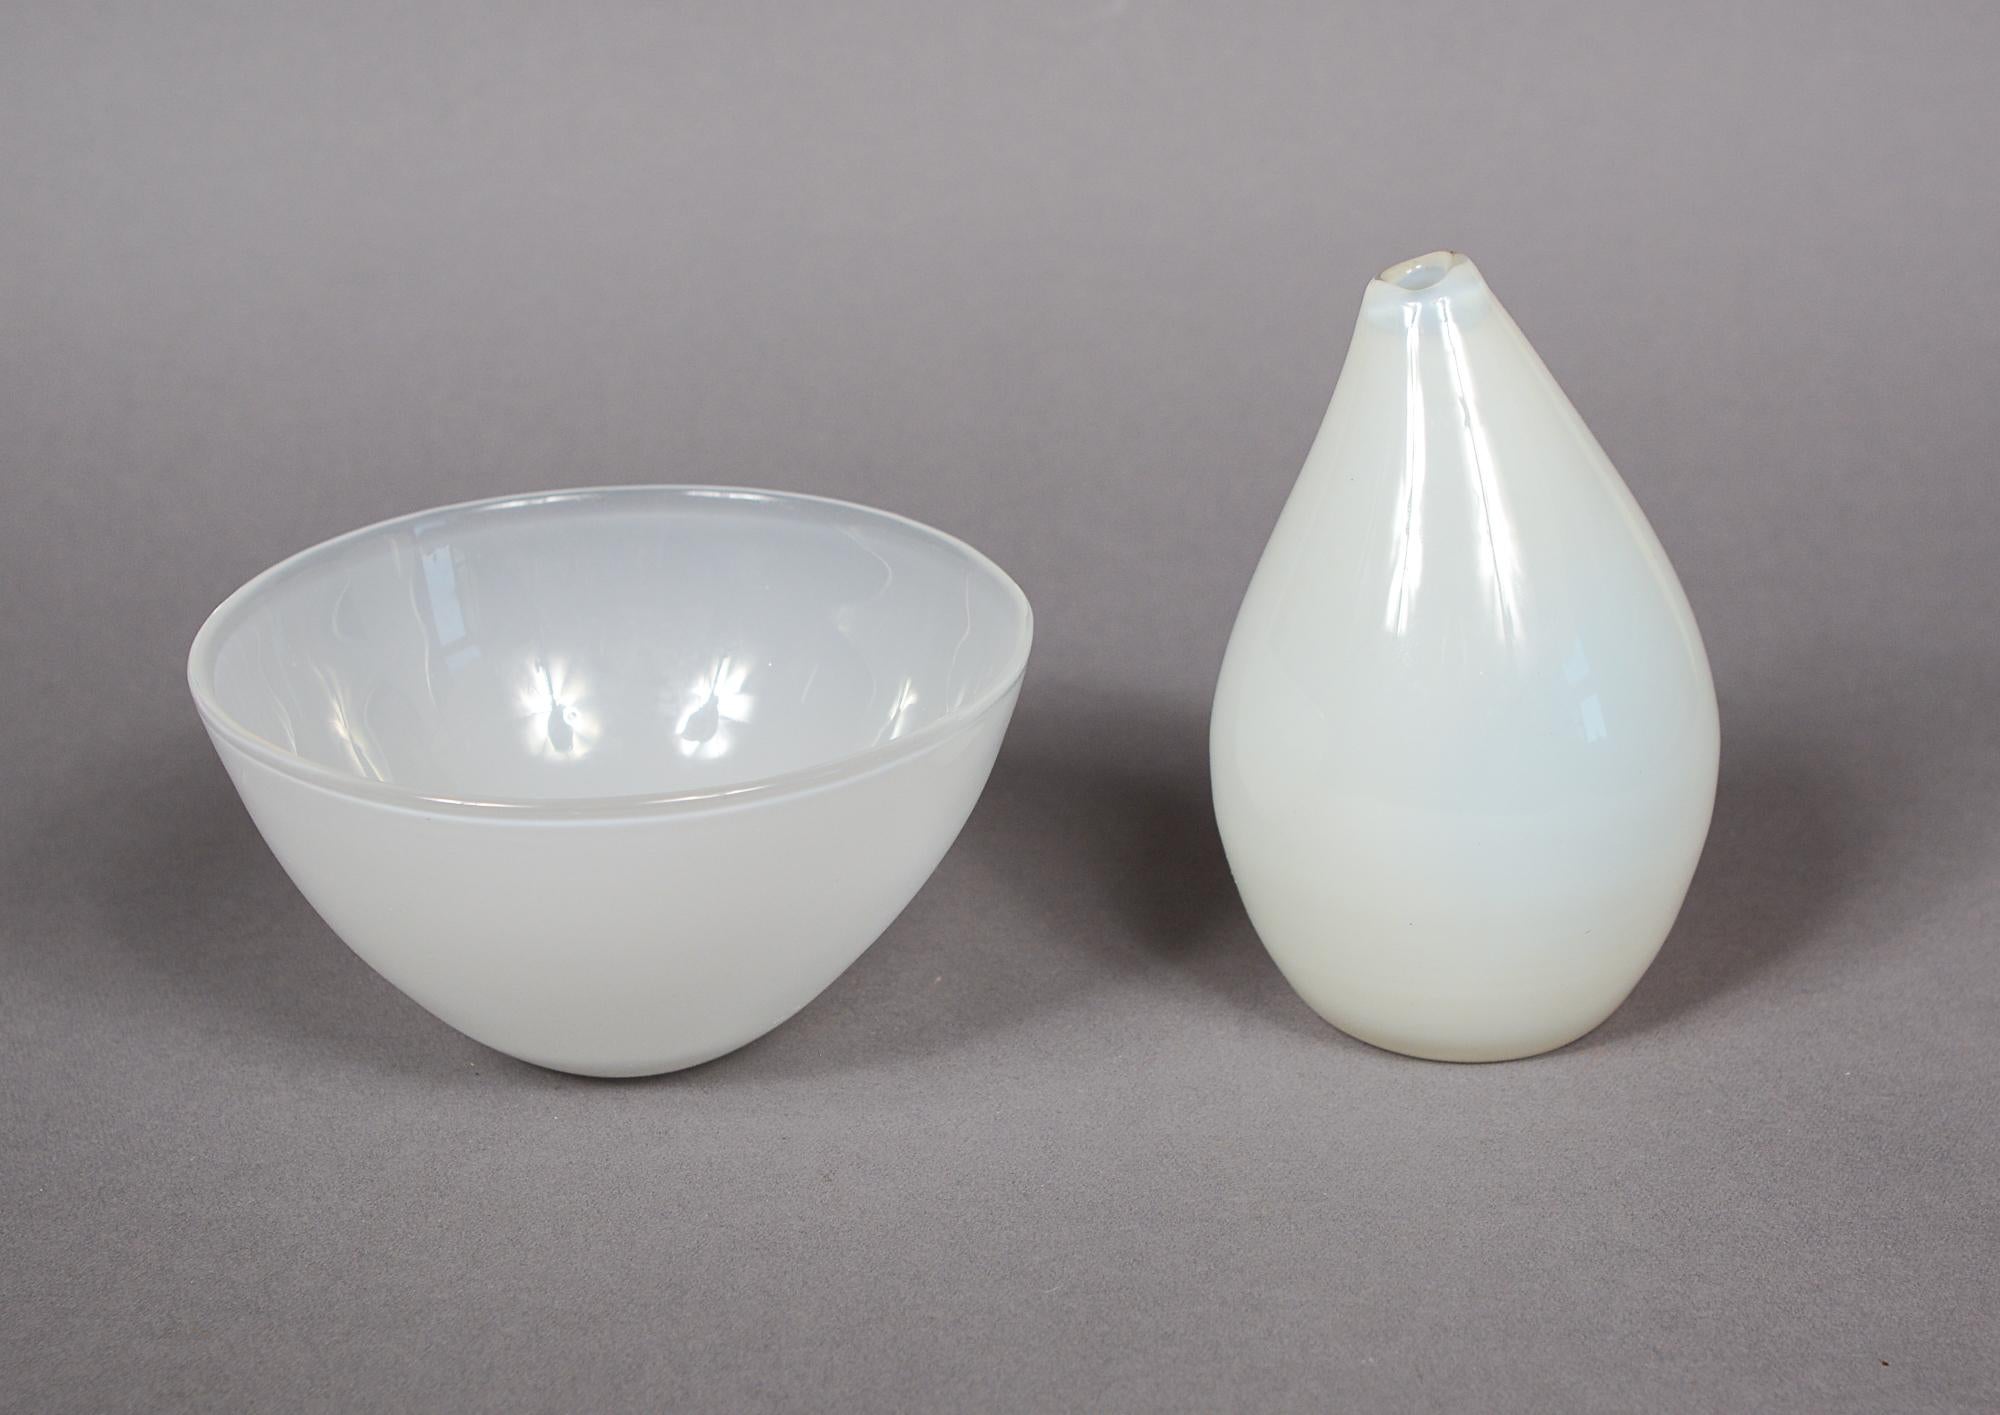 Two early designs by Tapio Wirkkala for Iittala of Finland. These consist of a vase model number 3287 and a bowl model number 5023. They first appeared in the Iittala catalog in 1948. They are both cased opalescent glass. The vase and bowl are